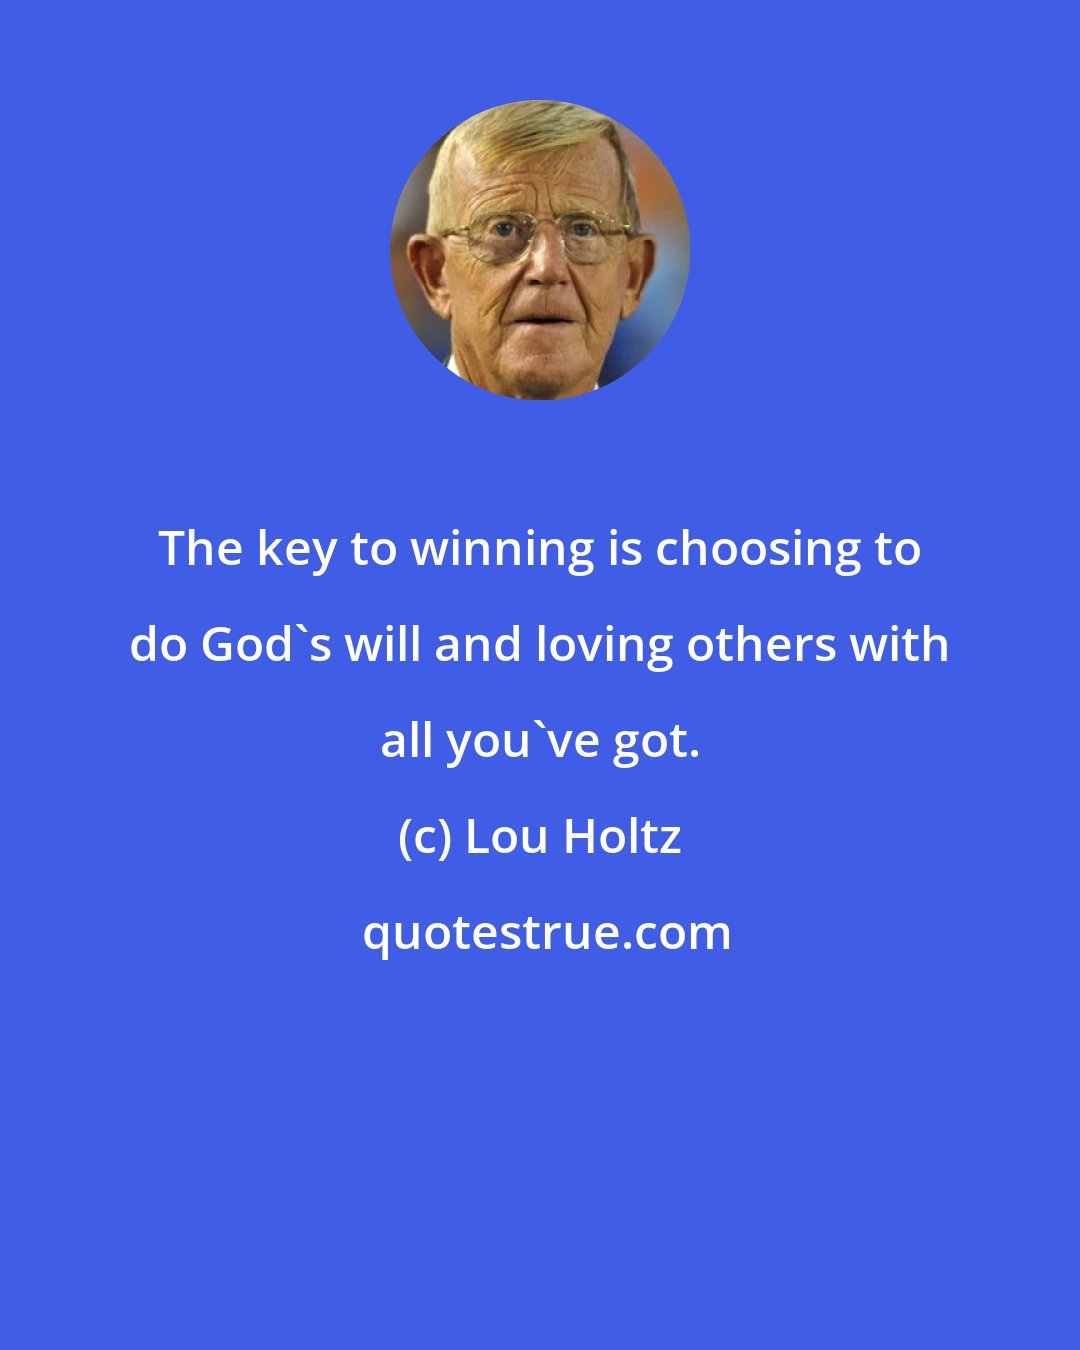 Lou Holtz: The key to winning is choosing to do God's will and loving others with all you've got.